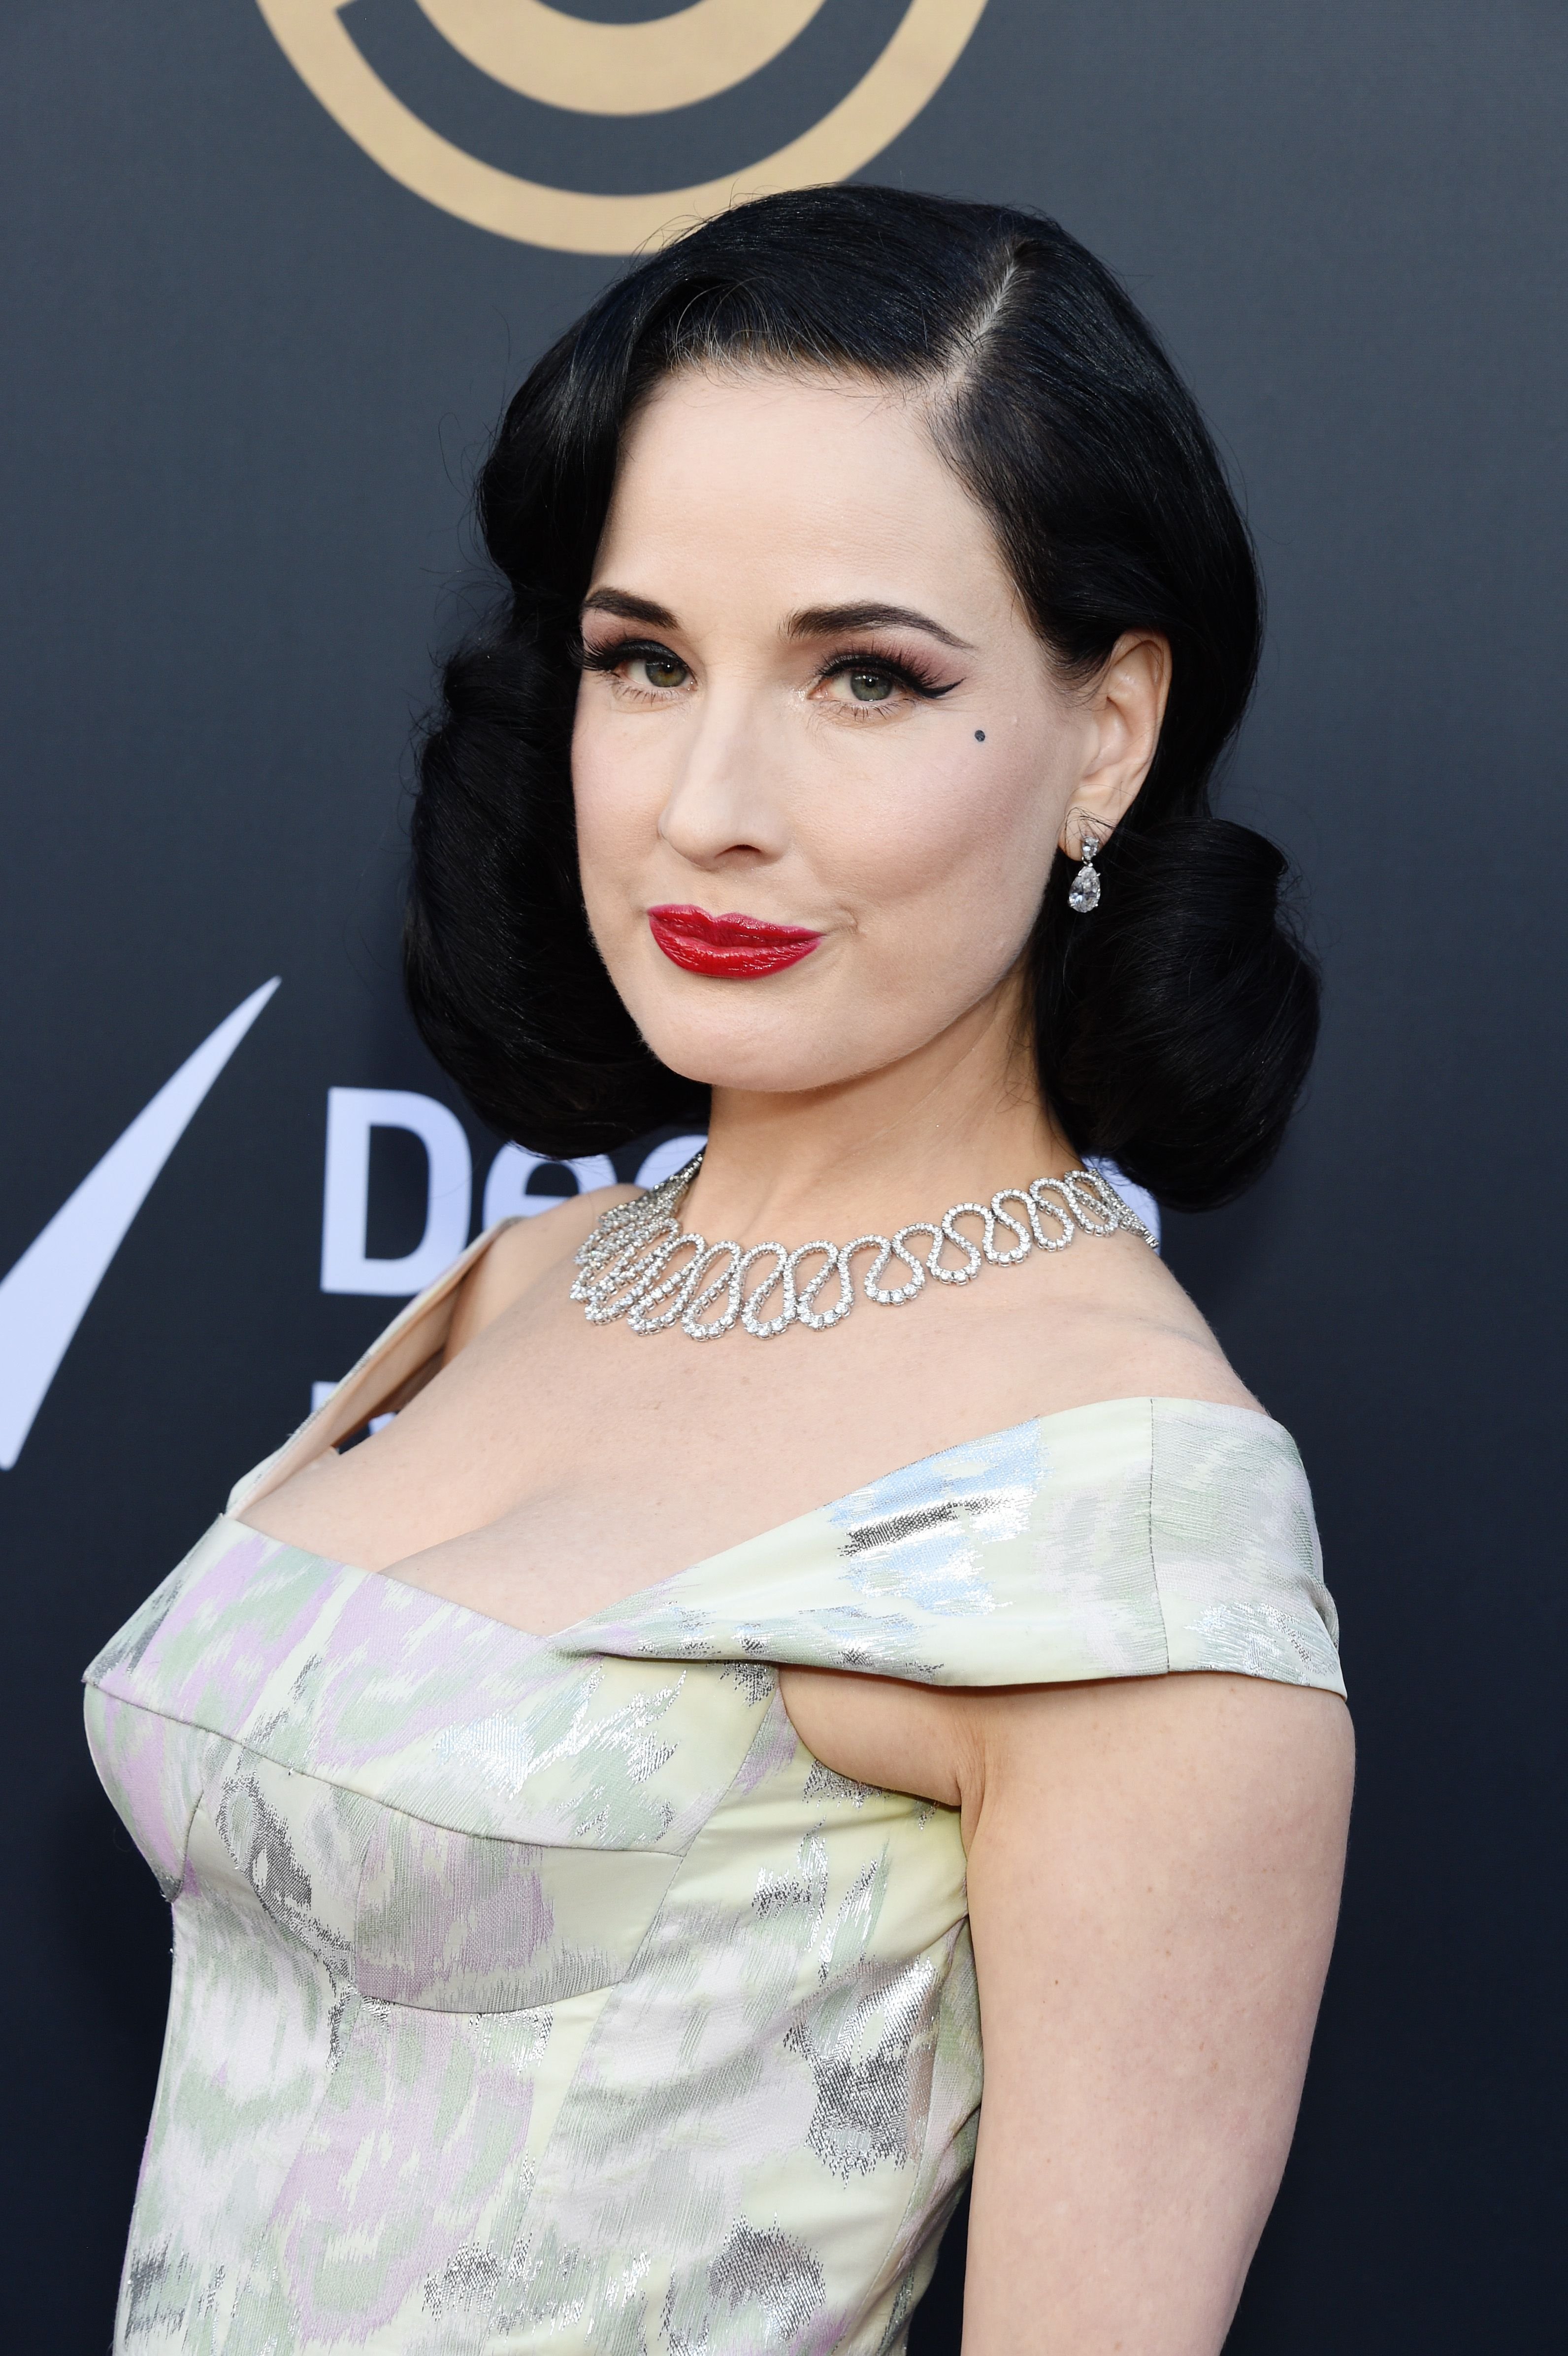  Dita Von Teese at the Comedy Central Roast of Alec Baldwin in 2019 in Beverly Hills, California | Source: Getty Images